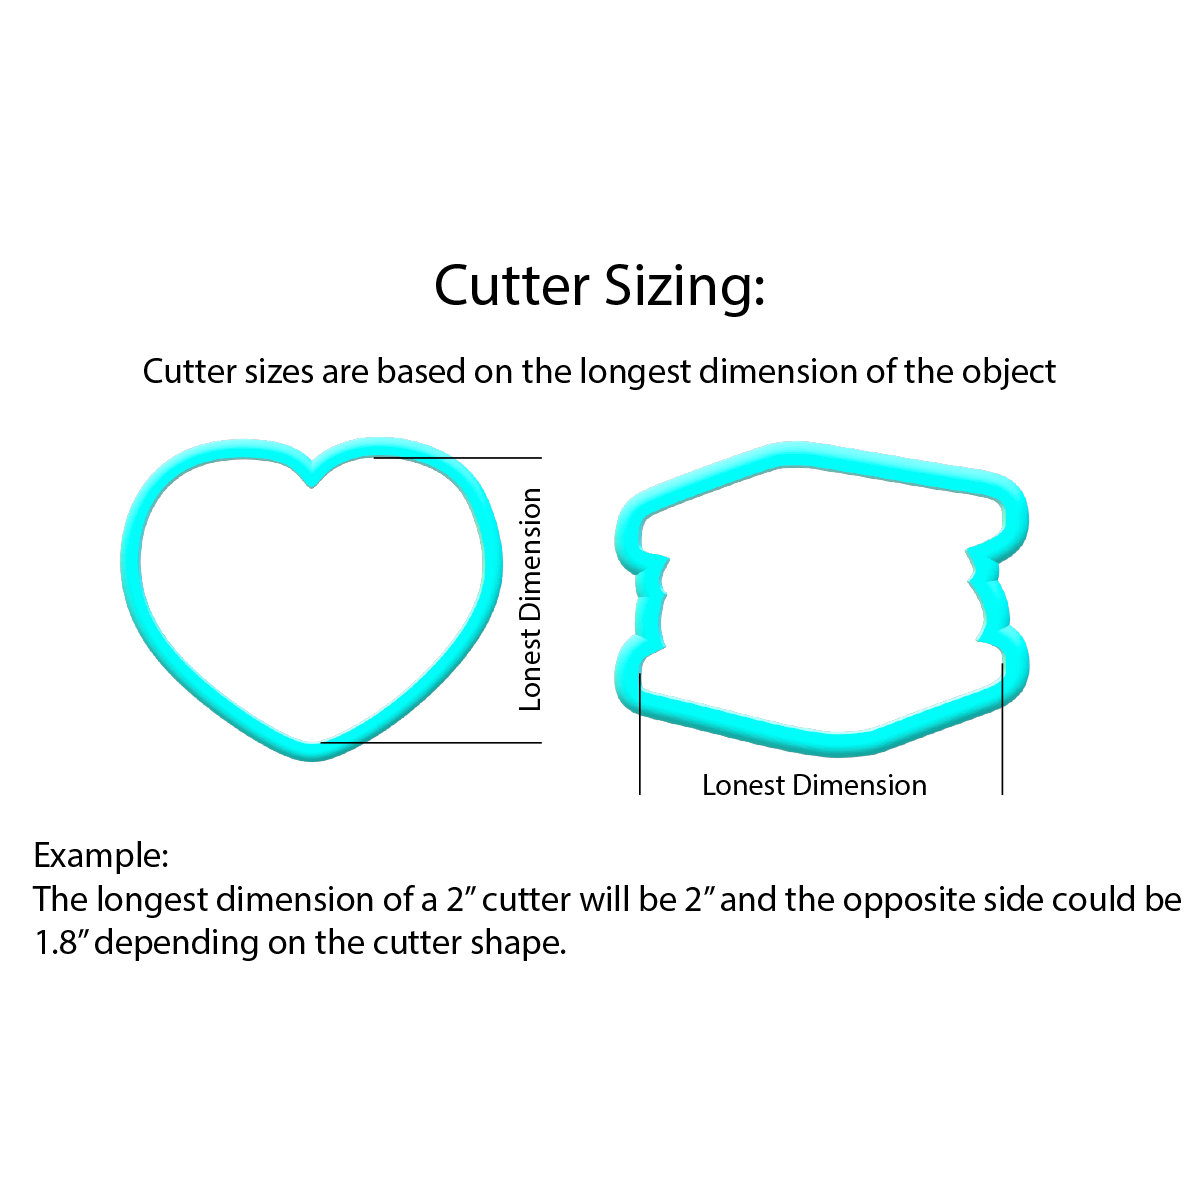 Retro Heart Sunglasses Cookie Cutters | With Imprint Cutter Option